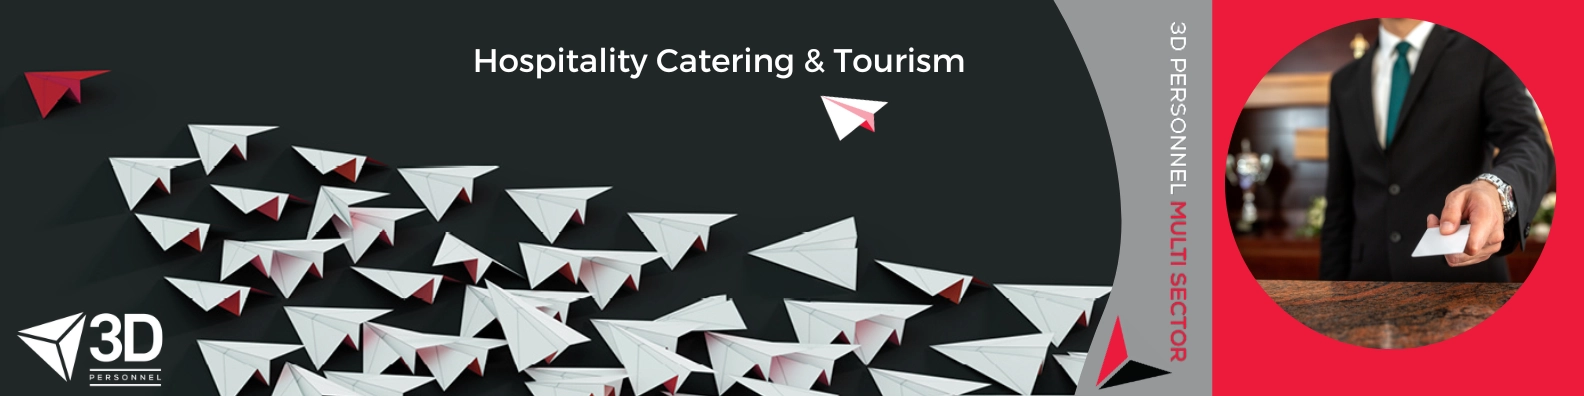 Hospitality Catering & Tourism graphic